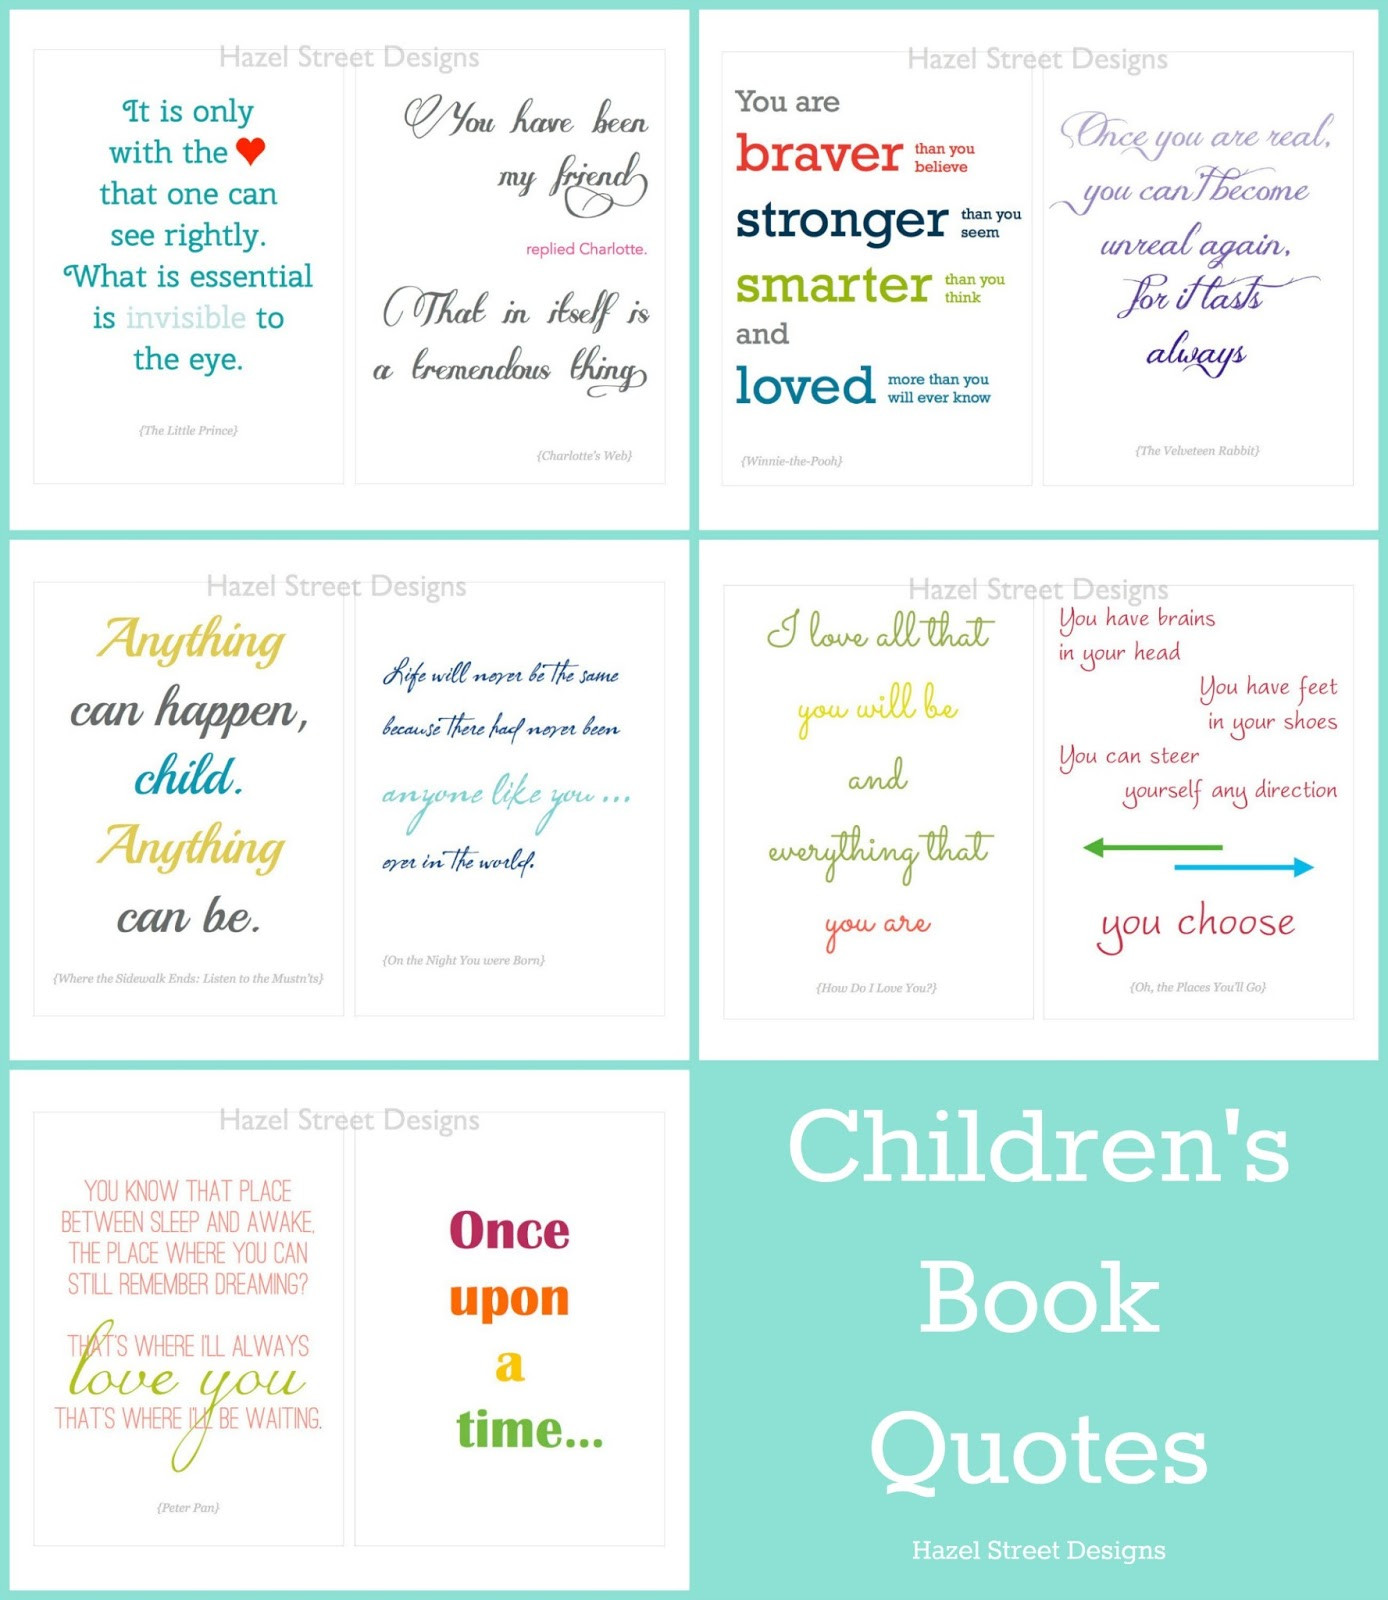 Quotes For Baby Shower Books
 Living in My Pajamas New Item Children s Book Quotes